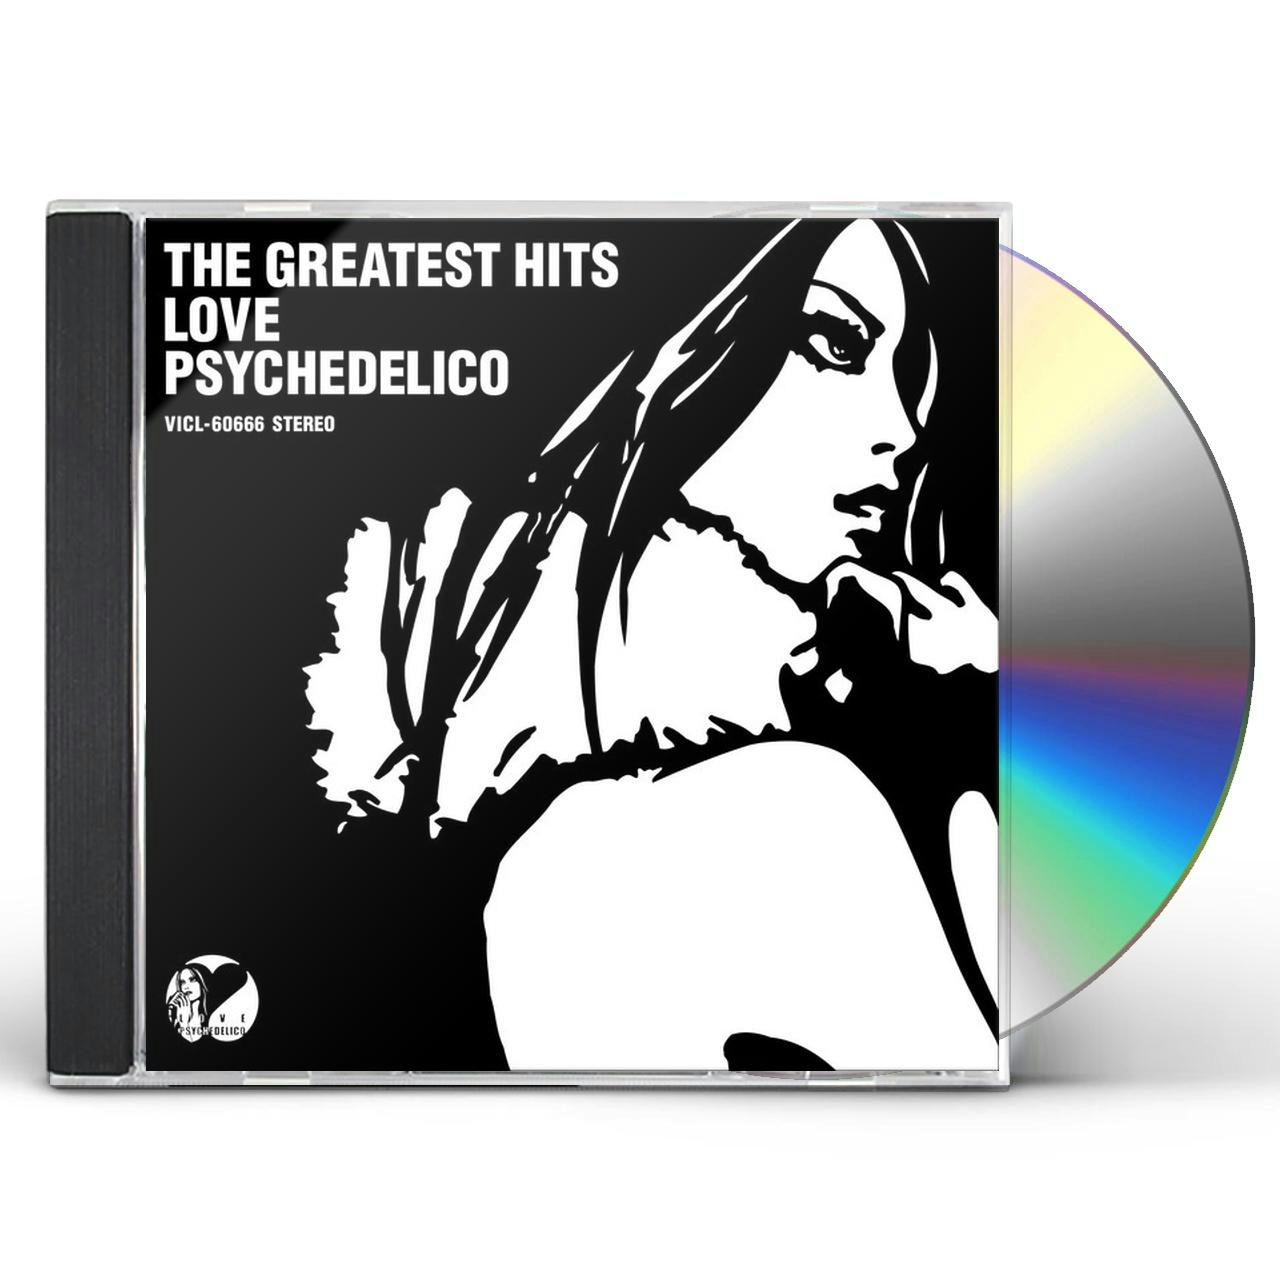 LOVE PSYCHEDELICO GREATEST HITS CD